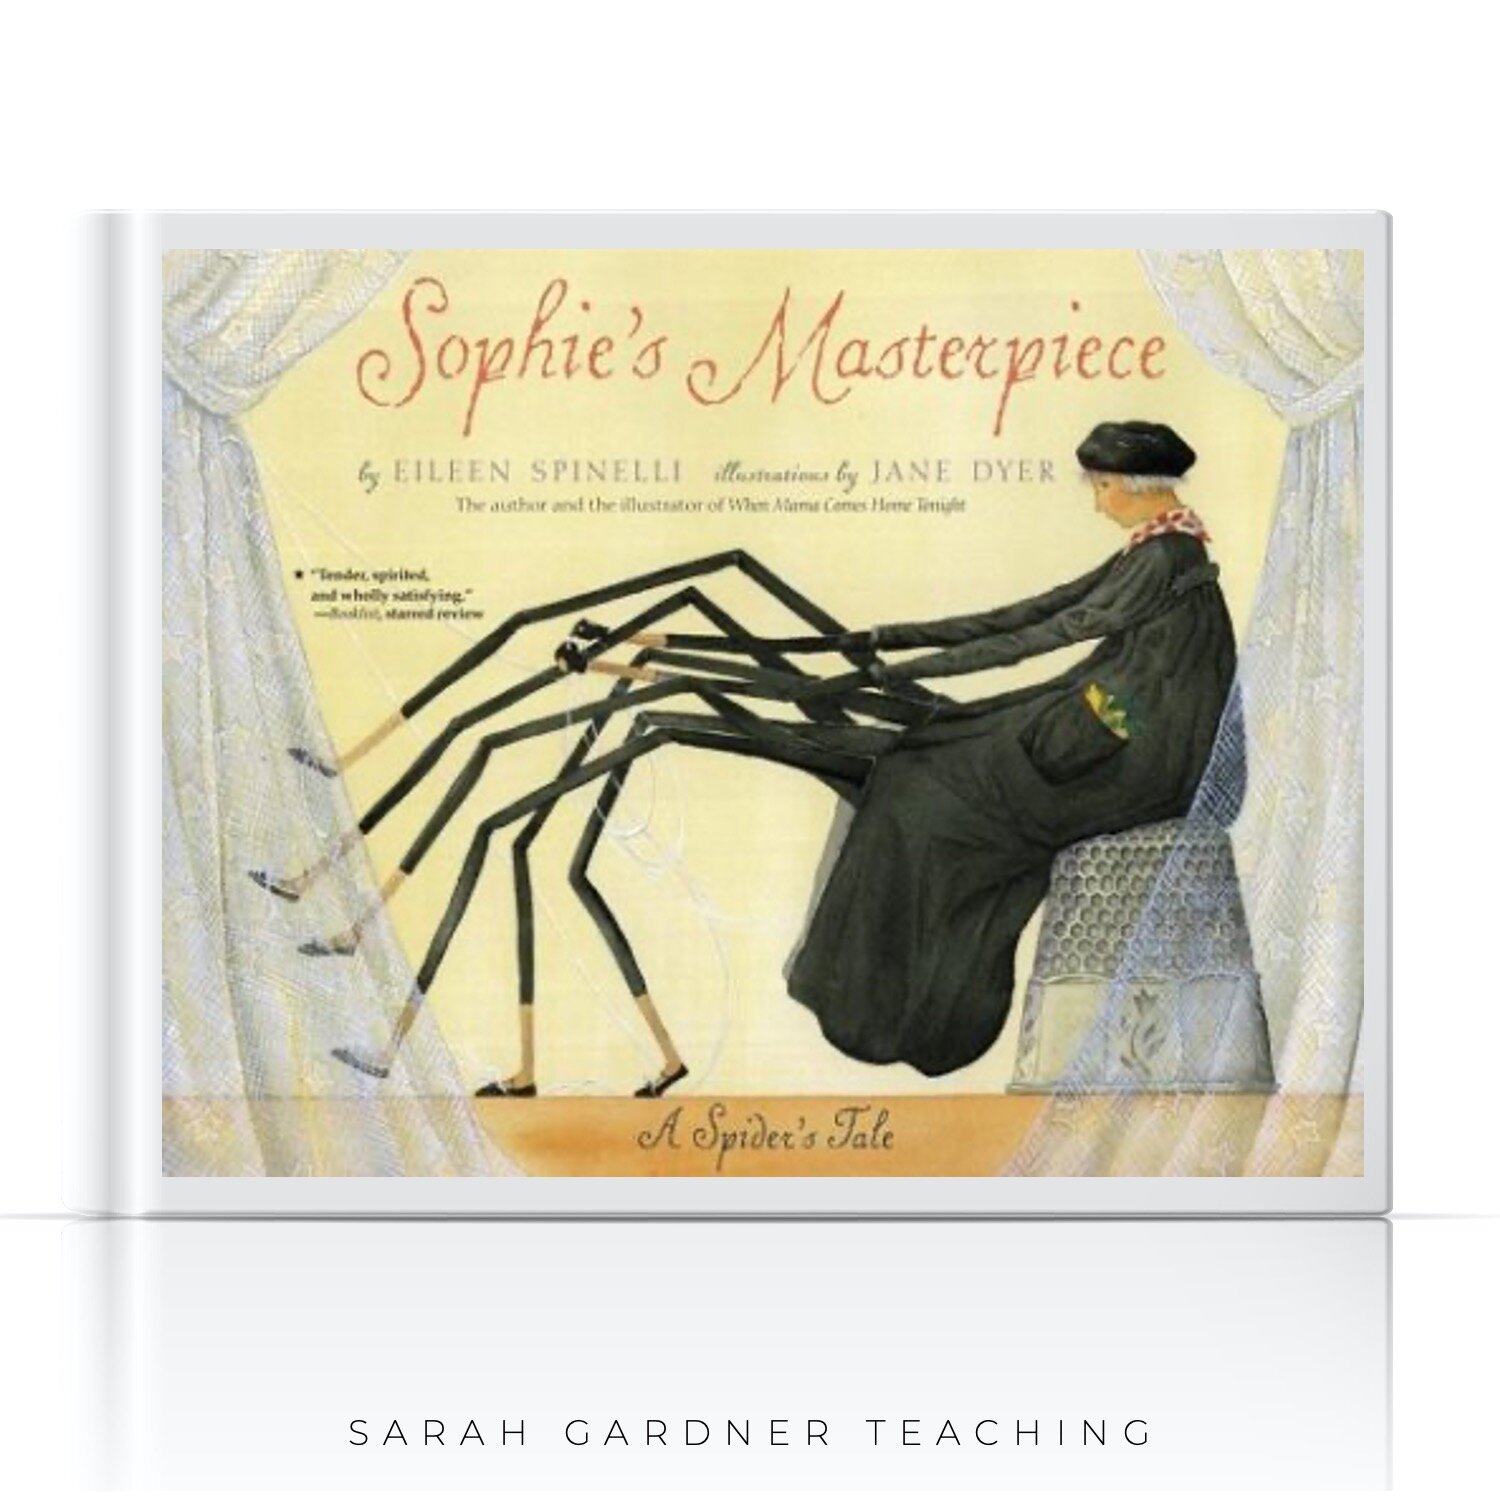 Teaching Elementary Art: 10 Must-Have Picture Books That Will